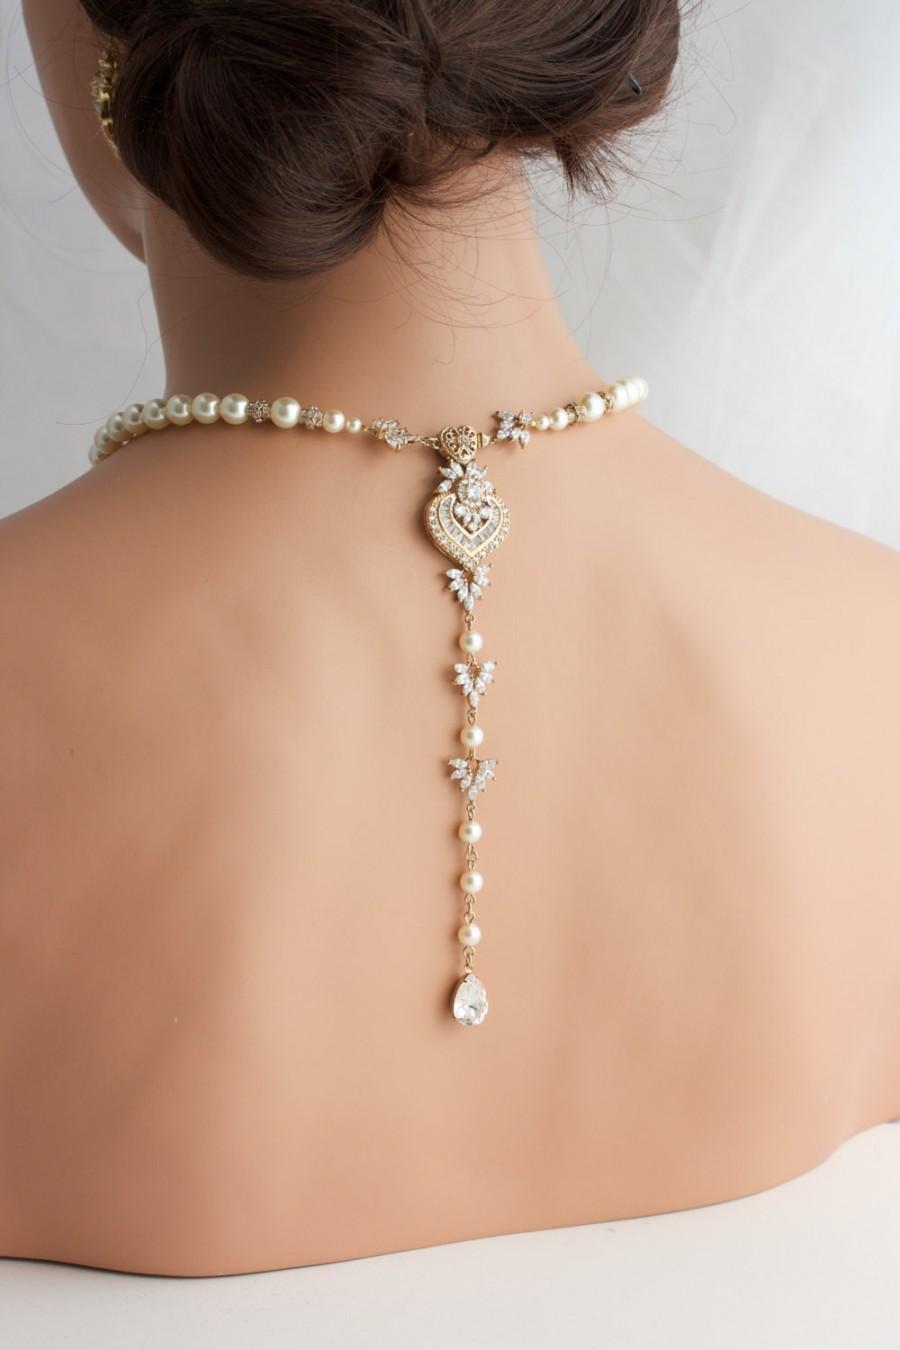 Hochzeit - Wedding Jewelry Gold Backdrop Necklace Long Back Drop Bridal Necklace Pearl Crystal Wedding Necklace EVIE